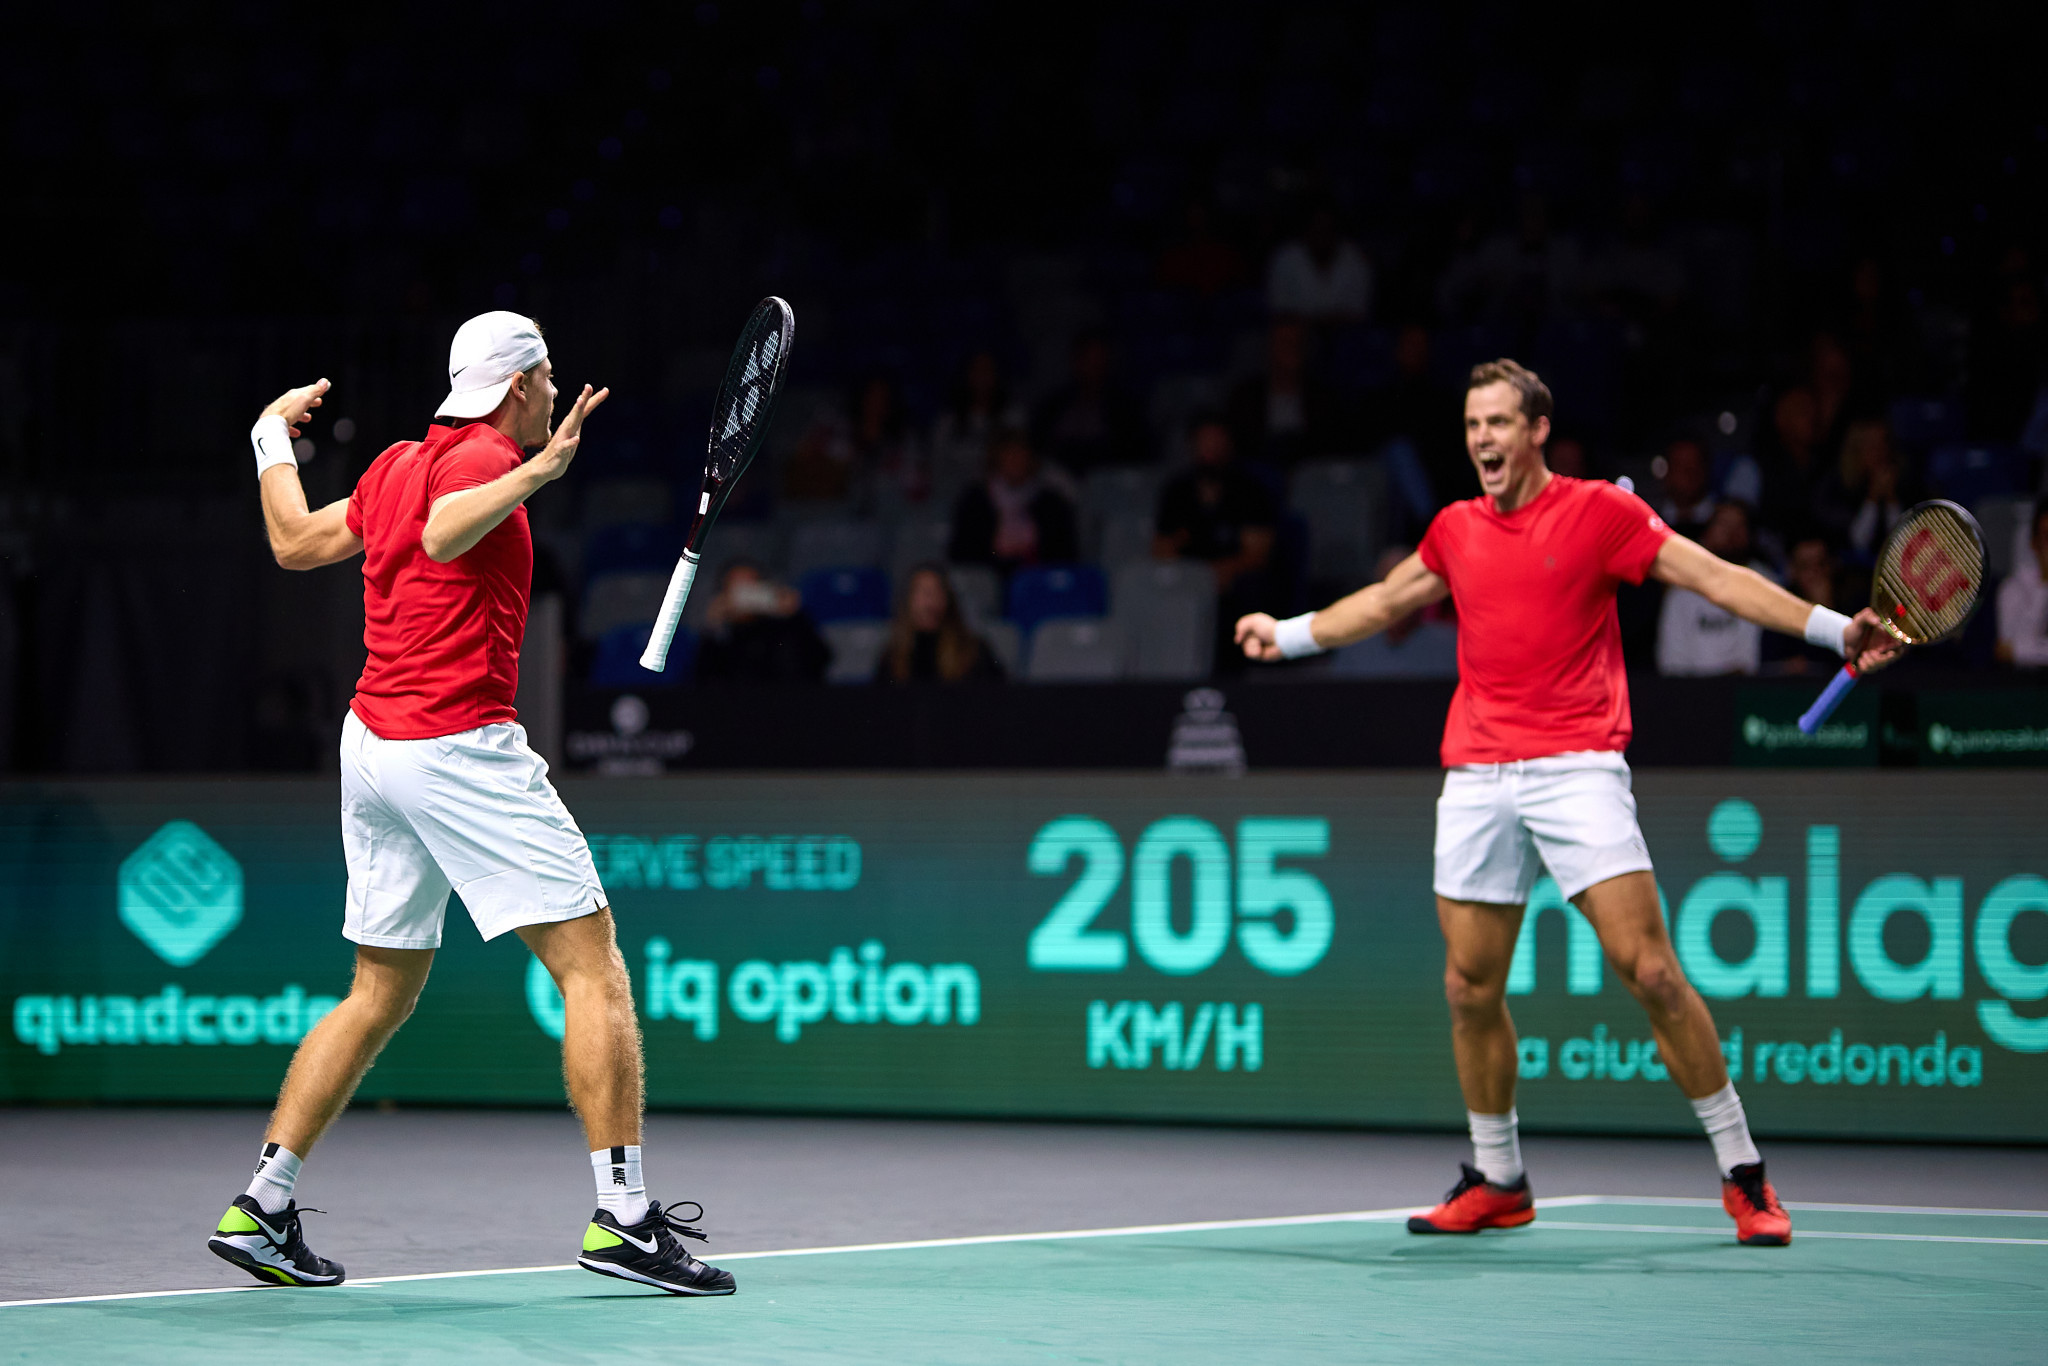 Vasek Pospisil, right, and Denis Shapovalov came back from one set down to defeat Kevin Krawietz and Tim Puetz of Germany ©Getty Images